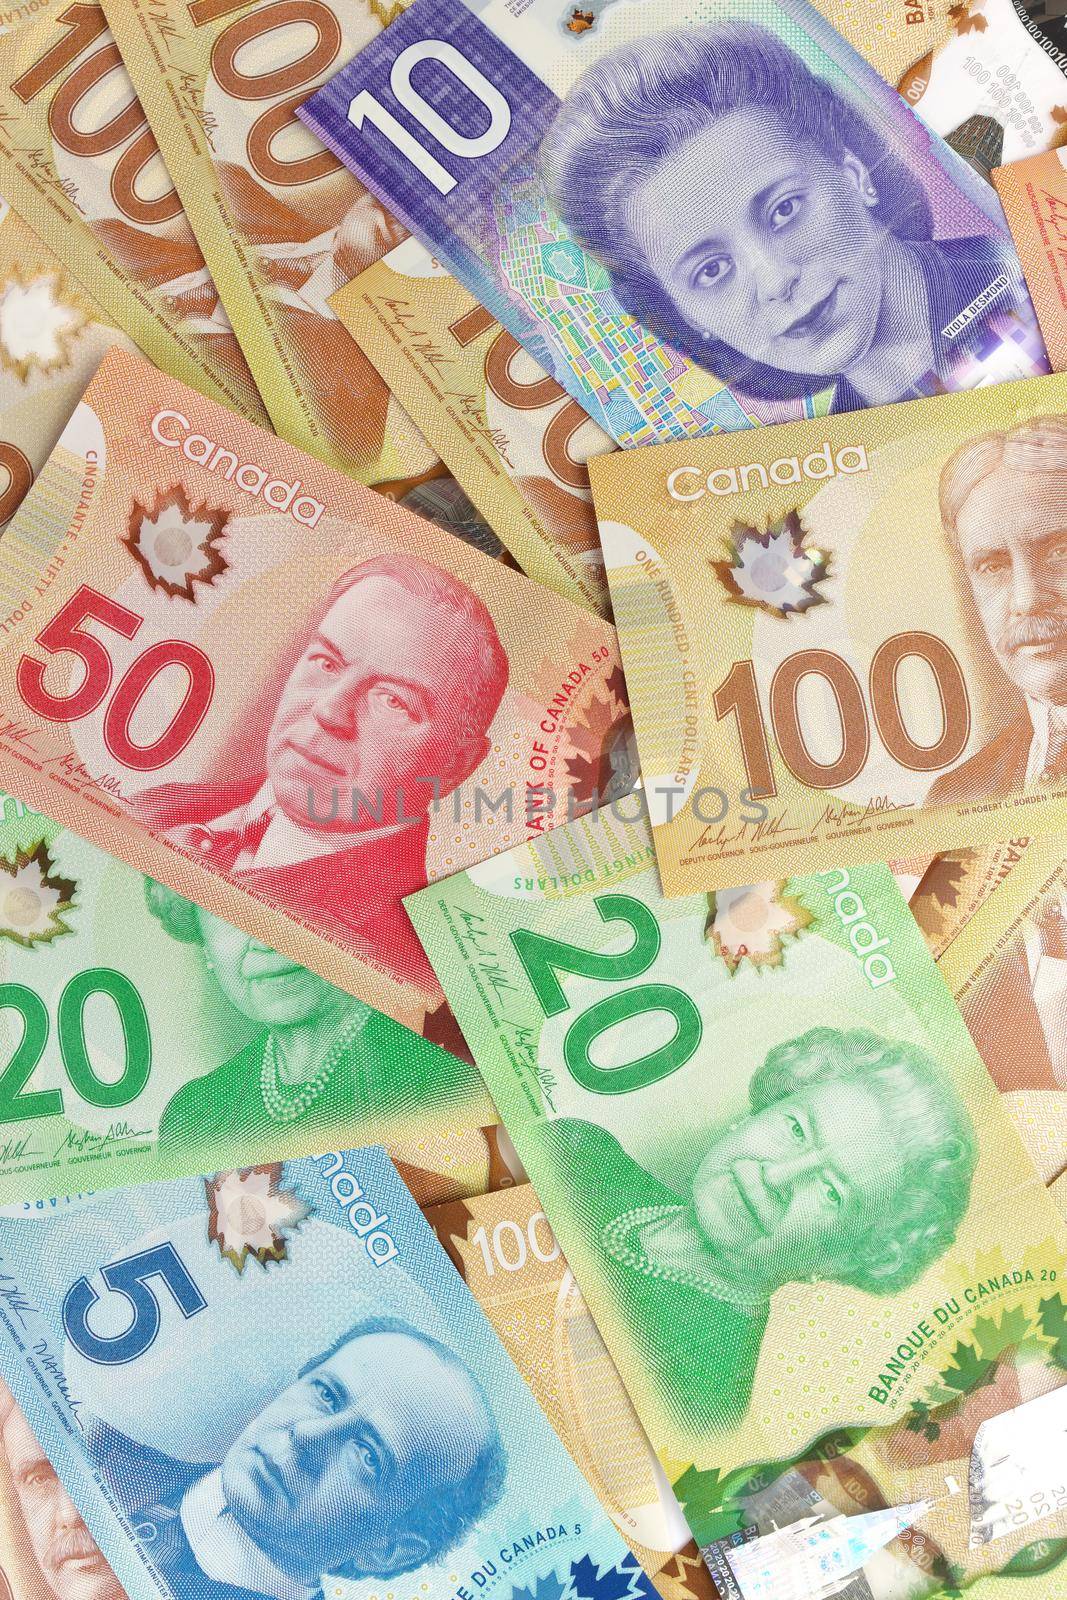 A Directly Above Full Frame Image of Canadian Banknotes of Different Values. Banknotes are piled randomly on top of each other and have values of 5 five, 10 ten, 20 twenty, 50 fifty, and 100 one hundred dollars. High quality photo